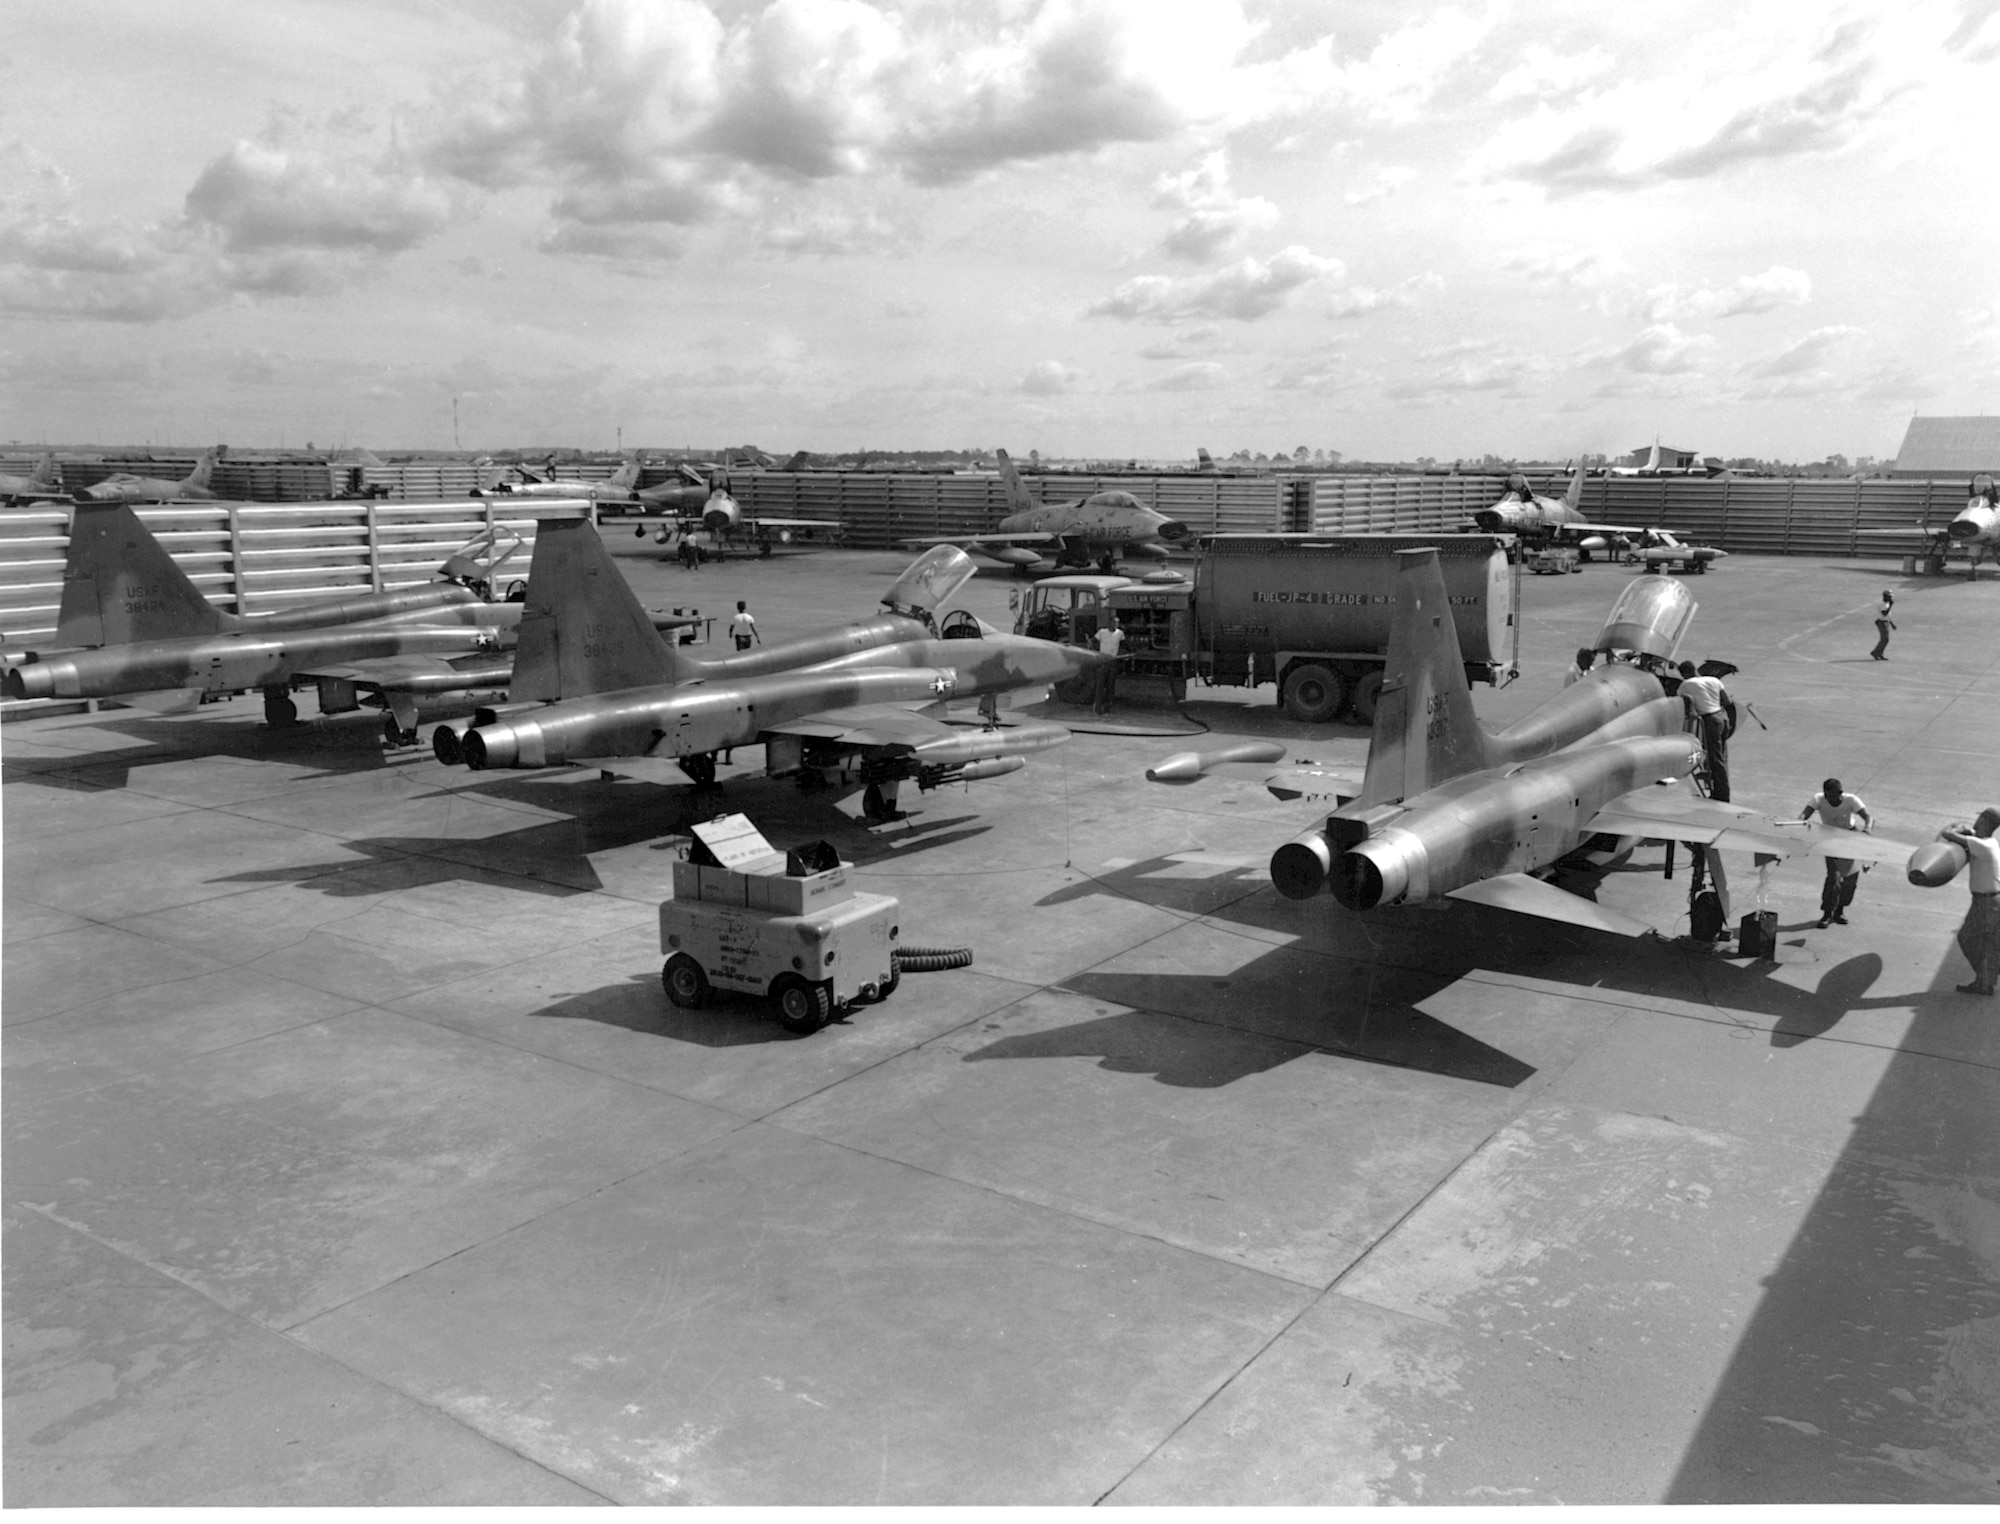 1960s -- Three F-5A aircraft, armed with 750 pound bombs, are shown in the revetment area at Bien Hoa Air Base, South Vietnam, Jan. 31, 1966.  (U.S. Air Force photo)